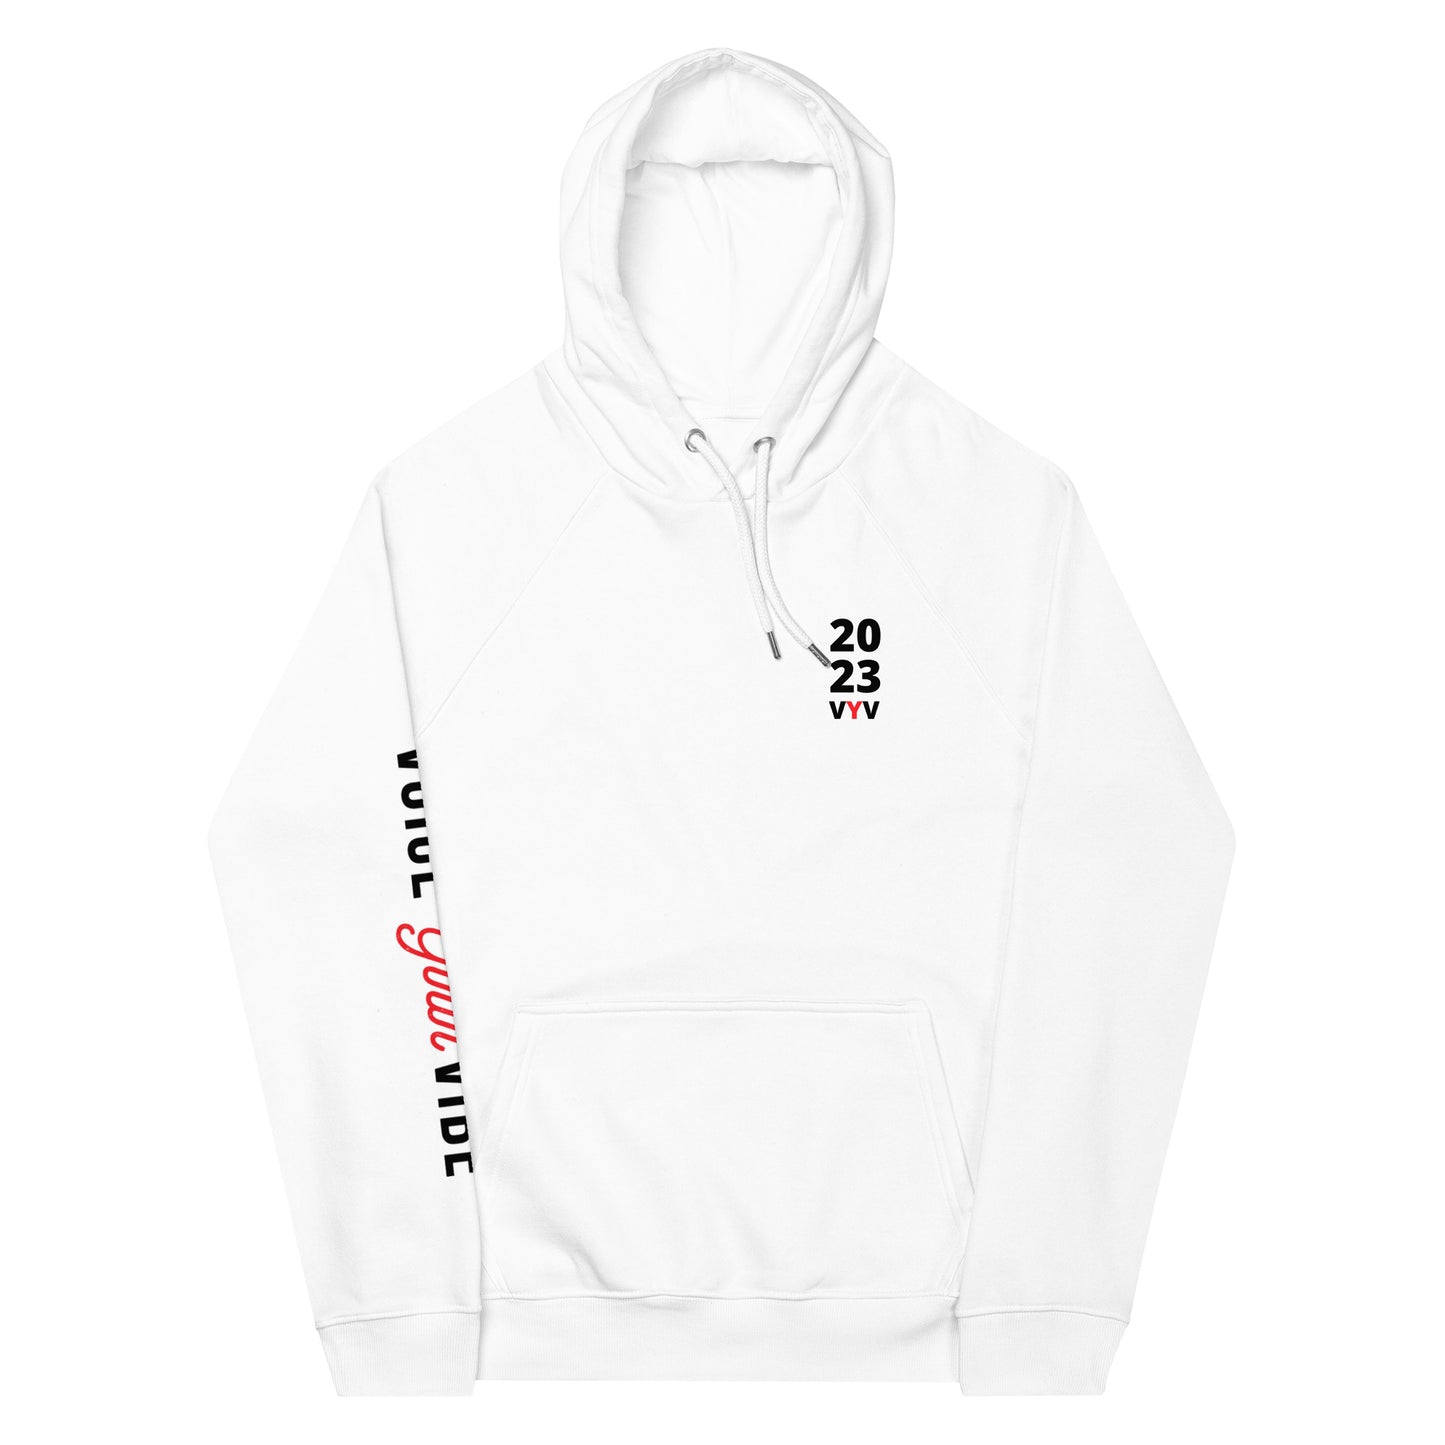 VYV Special Edition 2023 Inspire Hoodie